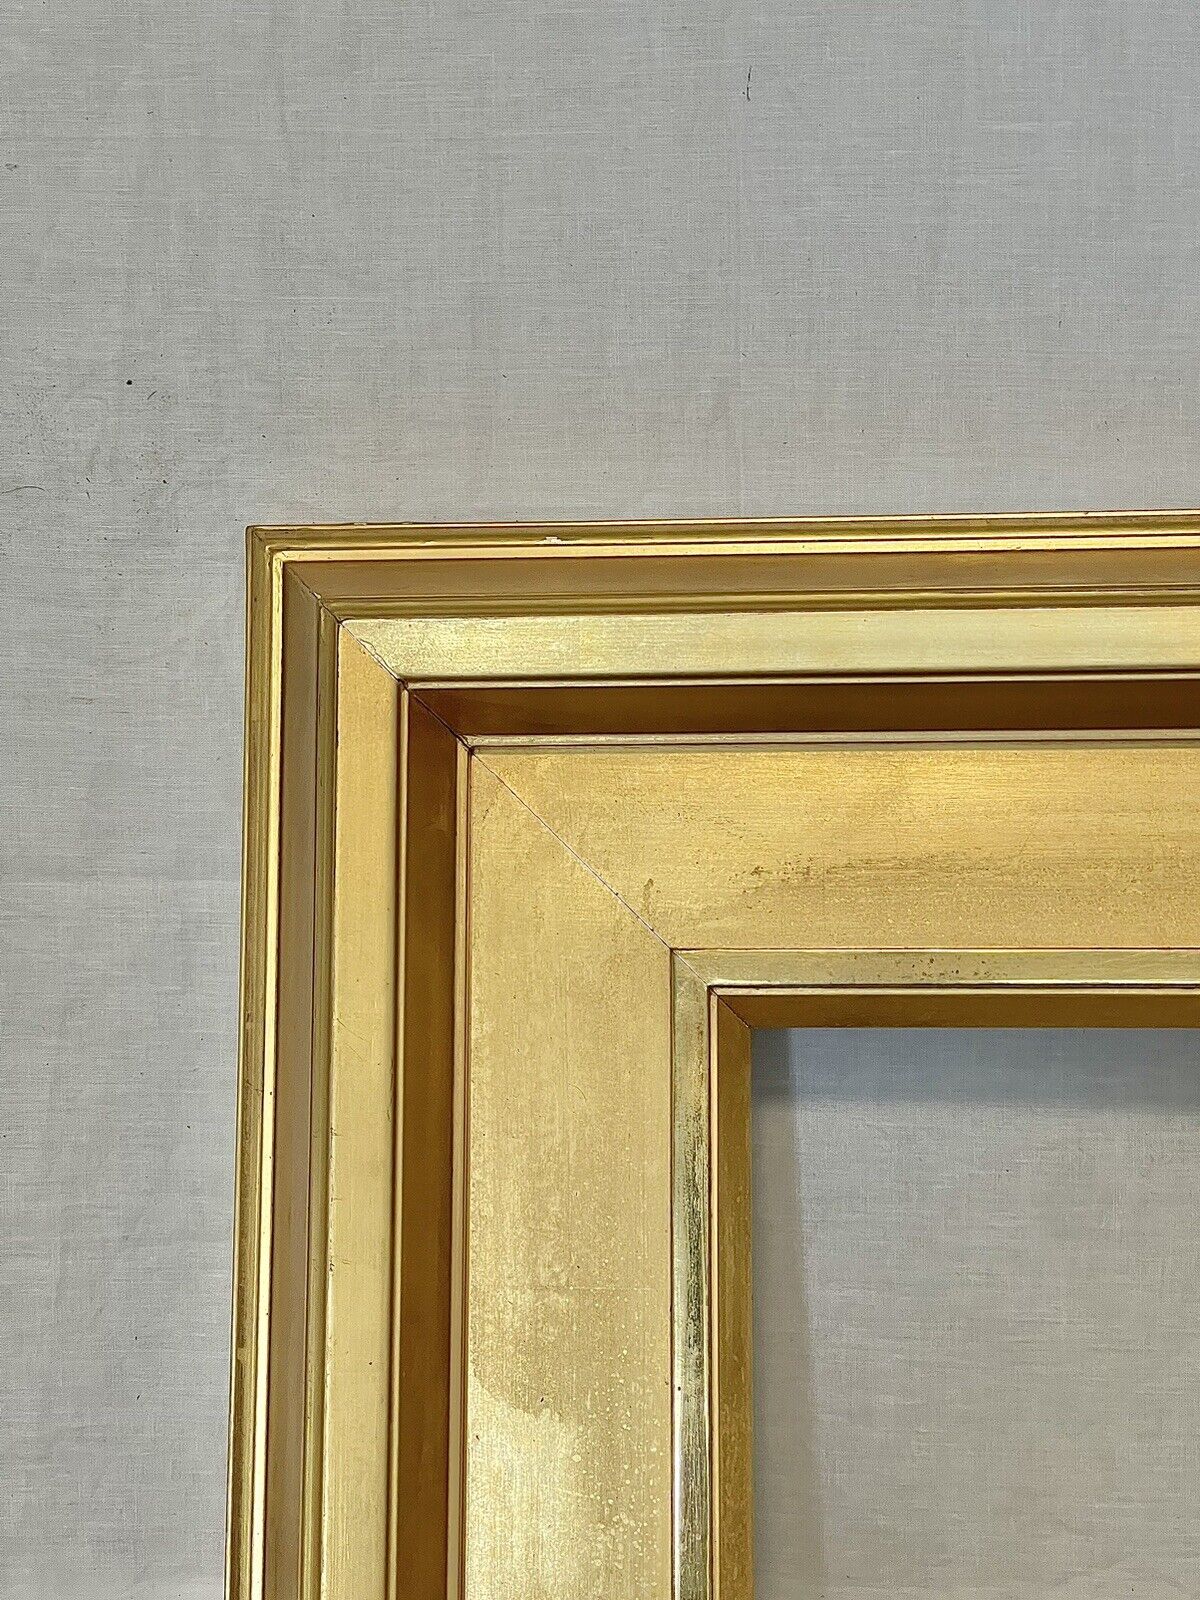 ANTIQUE FIT 13”x17” FRENCH 24k GOLD GILT GESSO DEEP WELL VICTORIAN PICTURE FRAME